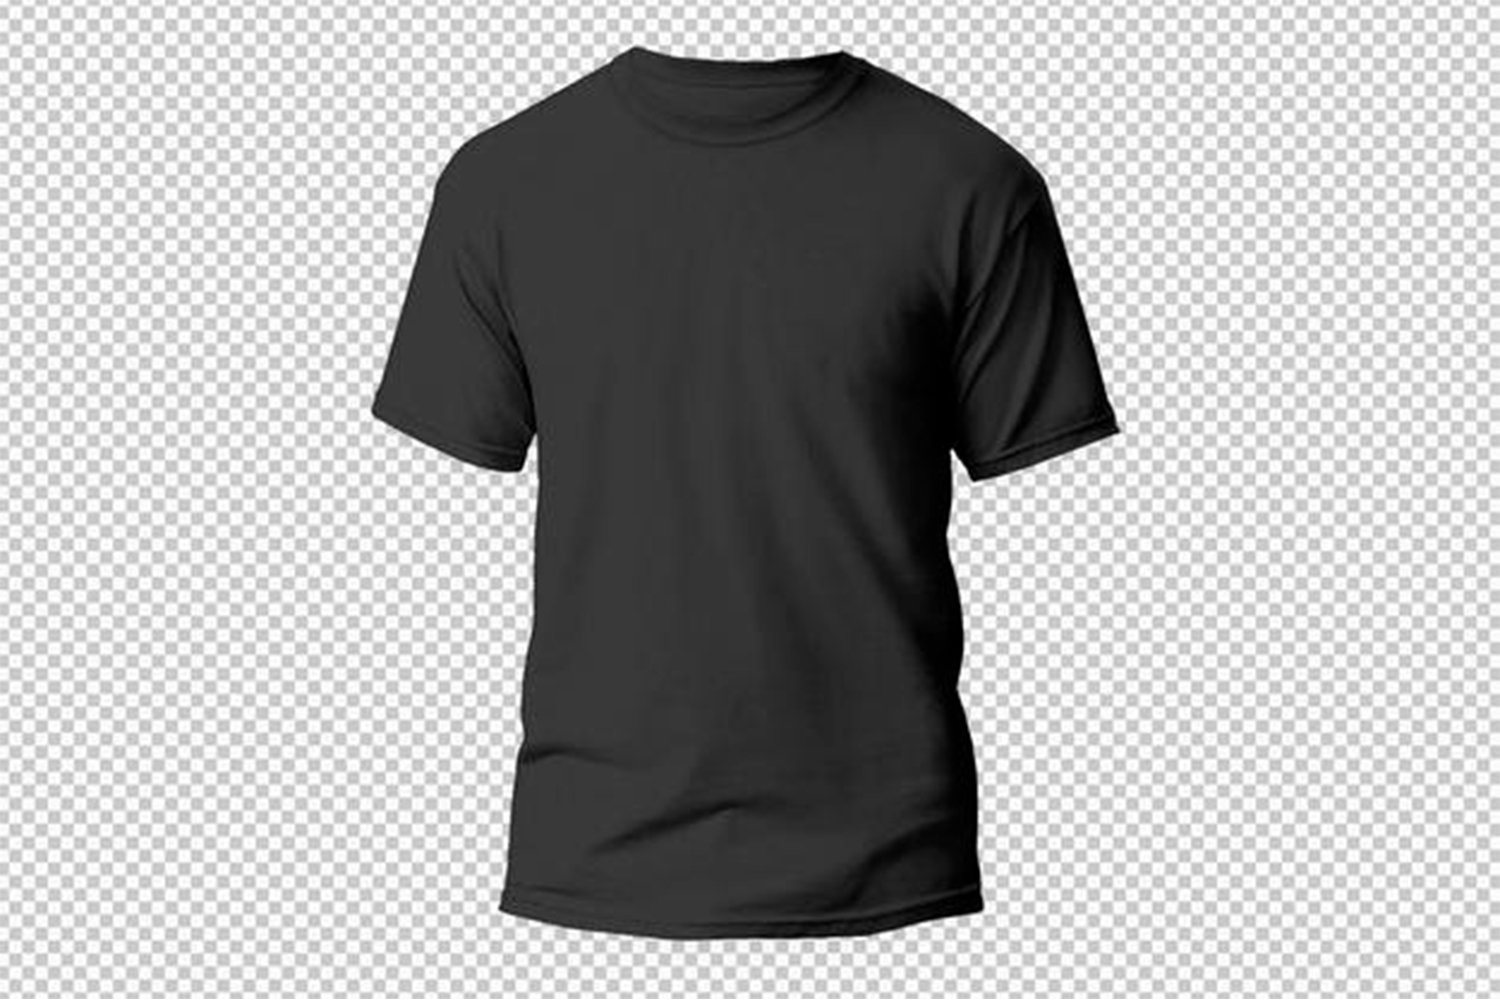 Isolated white t-shirt front view Mockup Free Download